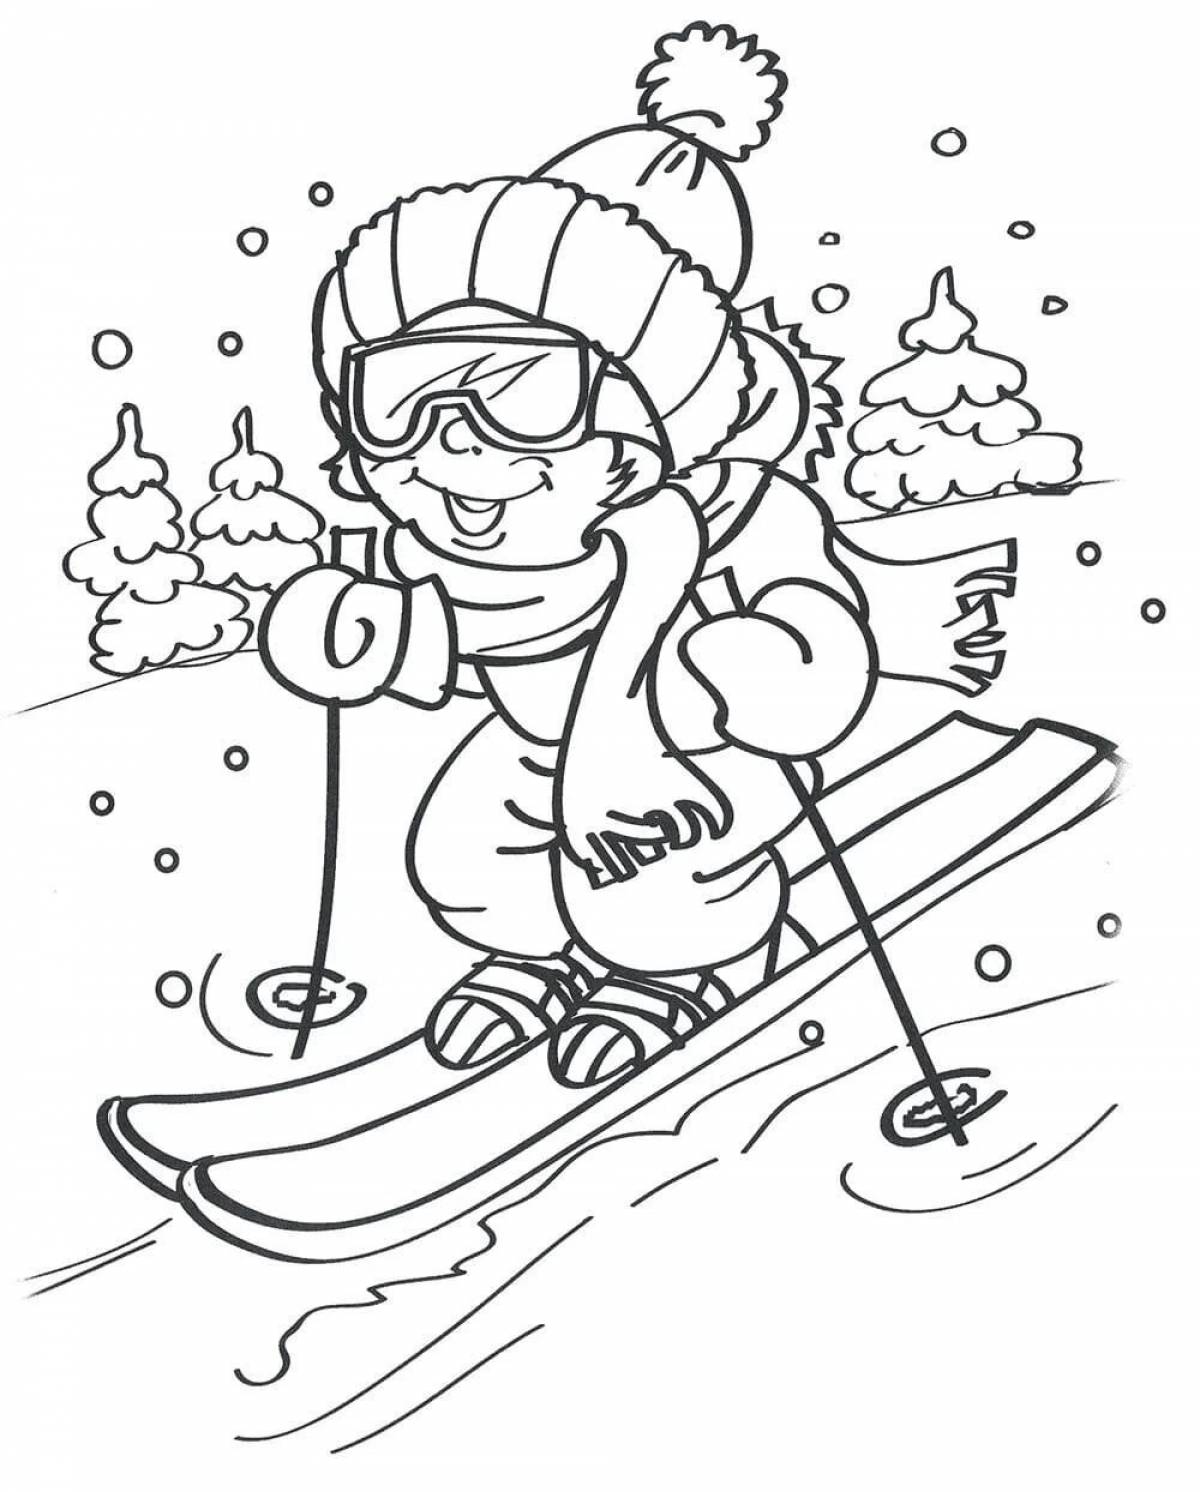 Coloring page mesmerizing boy on skis